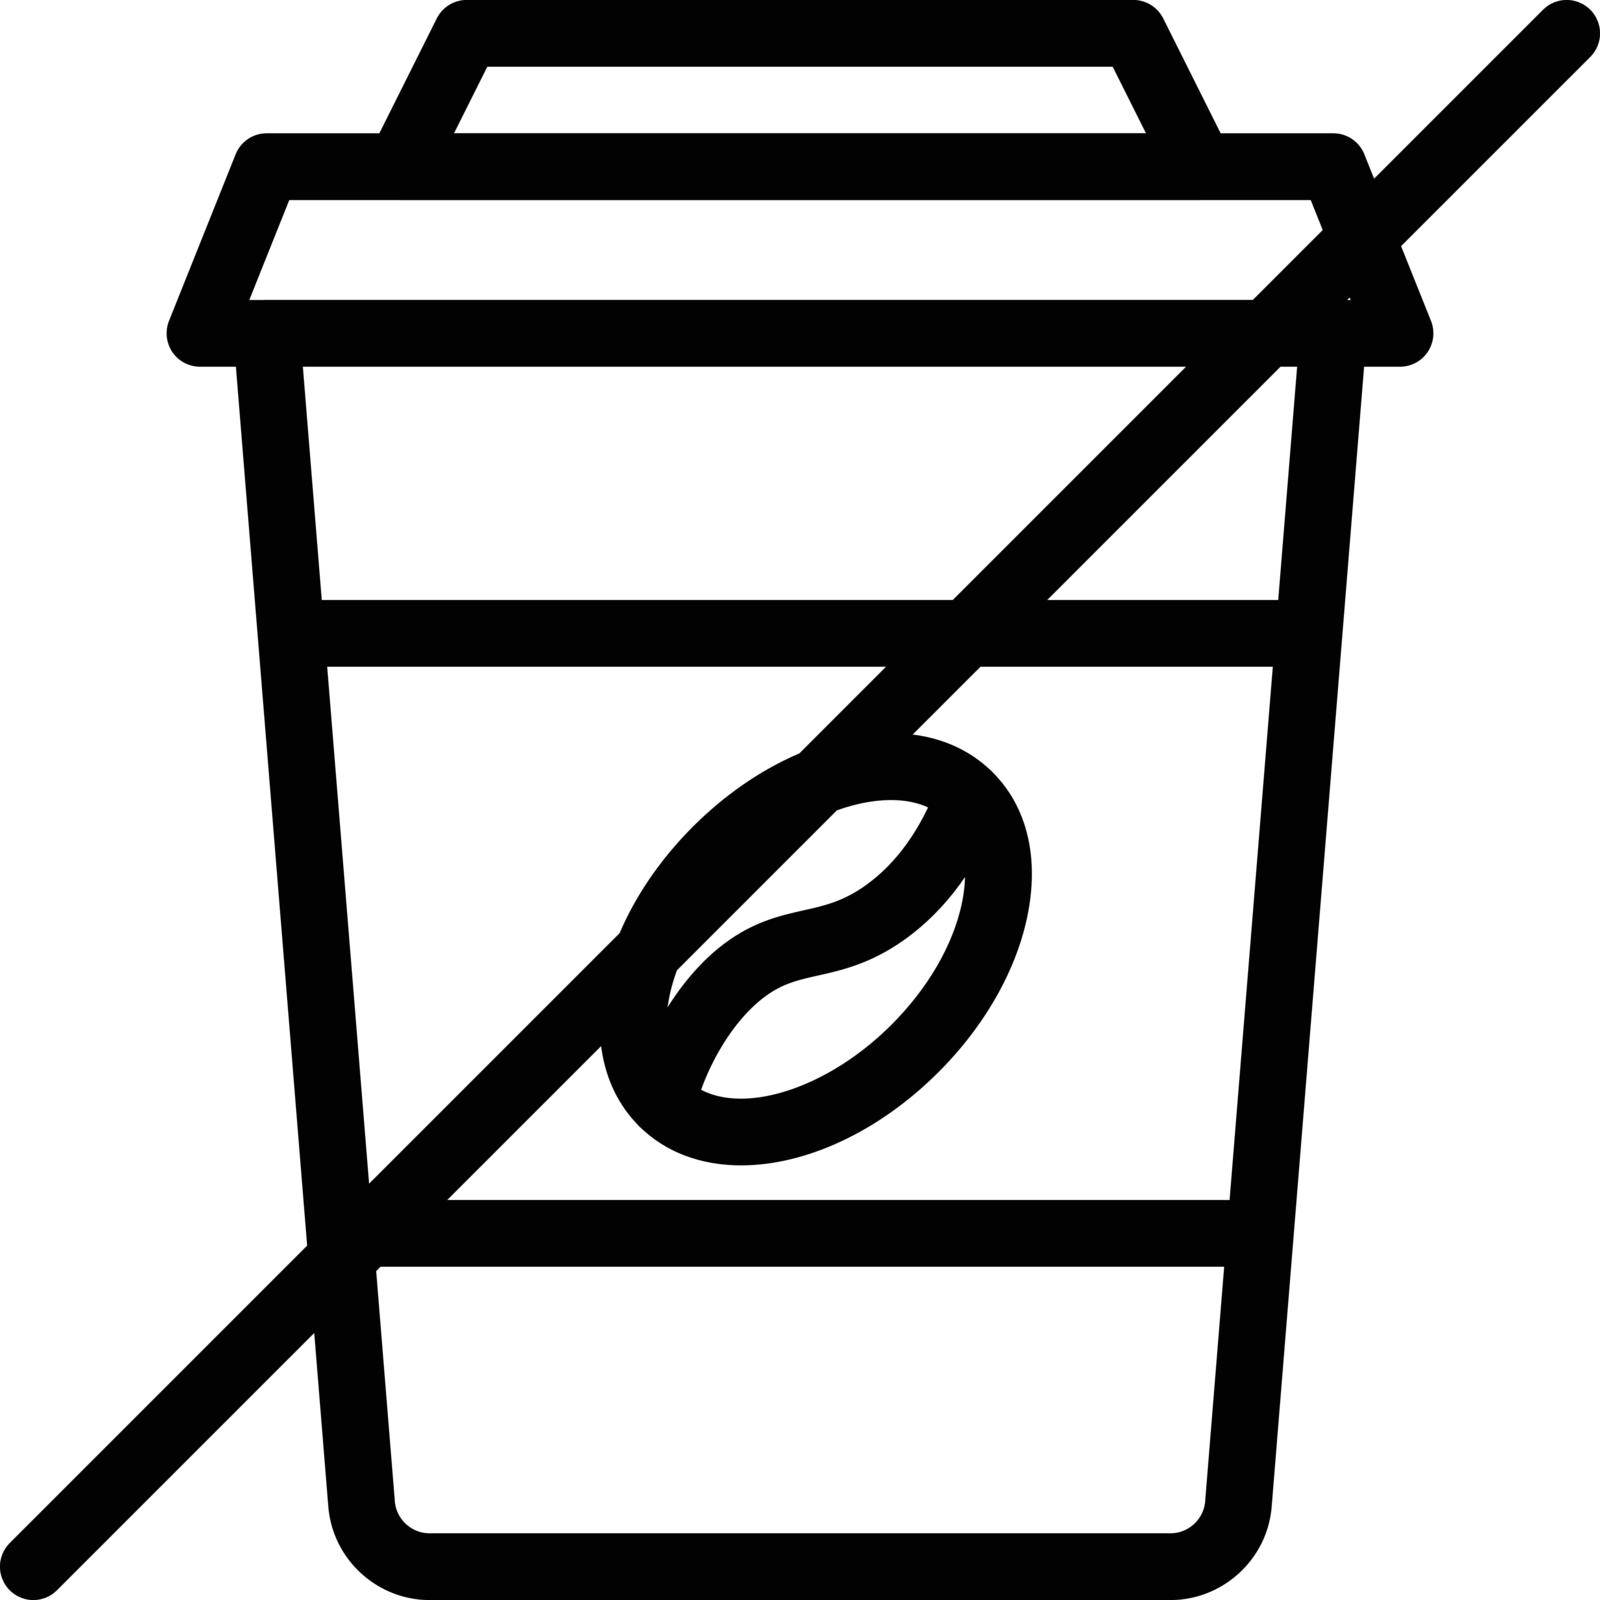 coffee cup Vector illustration on a transparent background. Premium quality symmbols. Thin line vector icons for concept and graphic design.